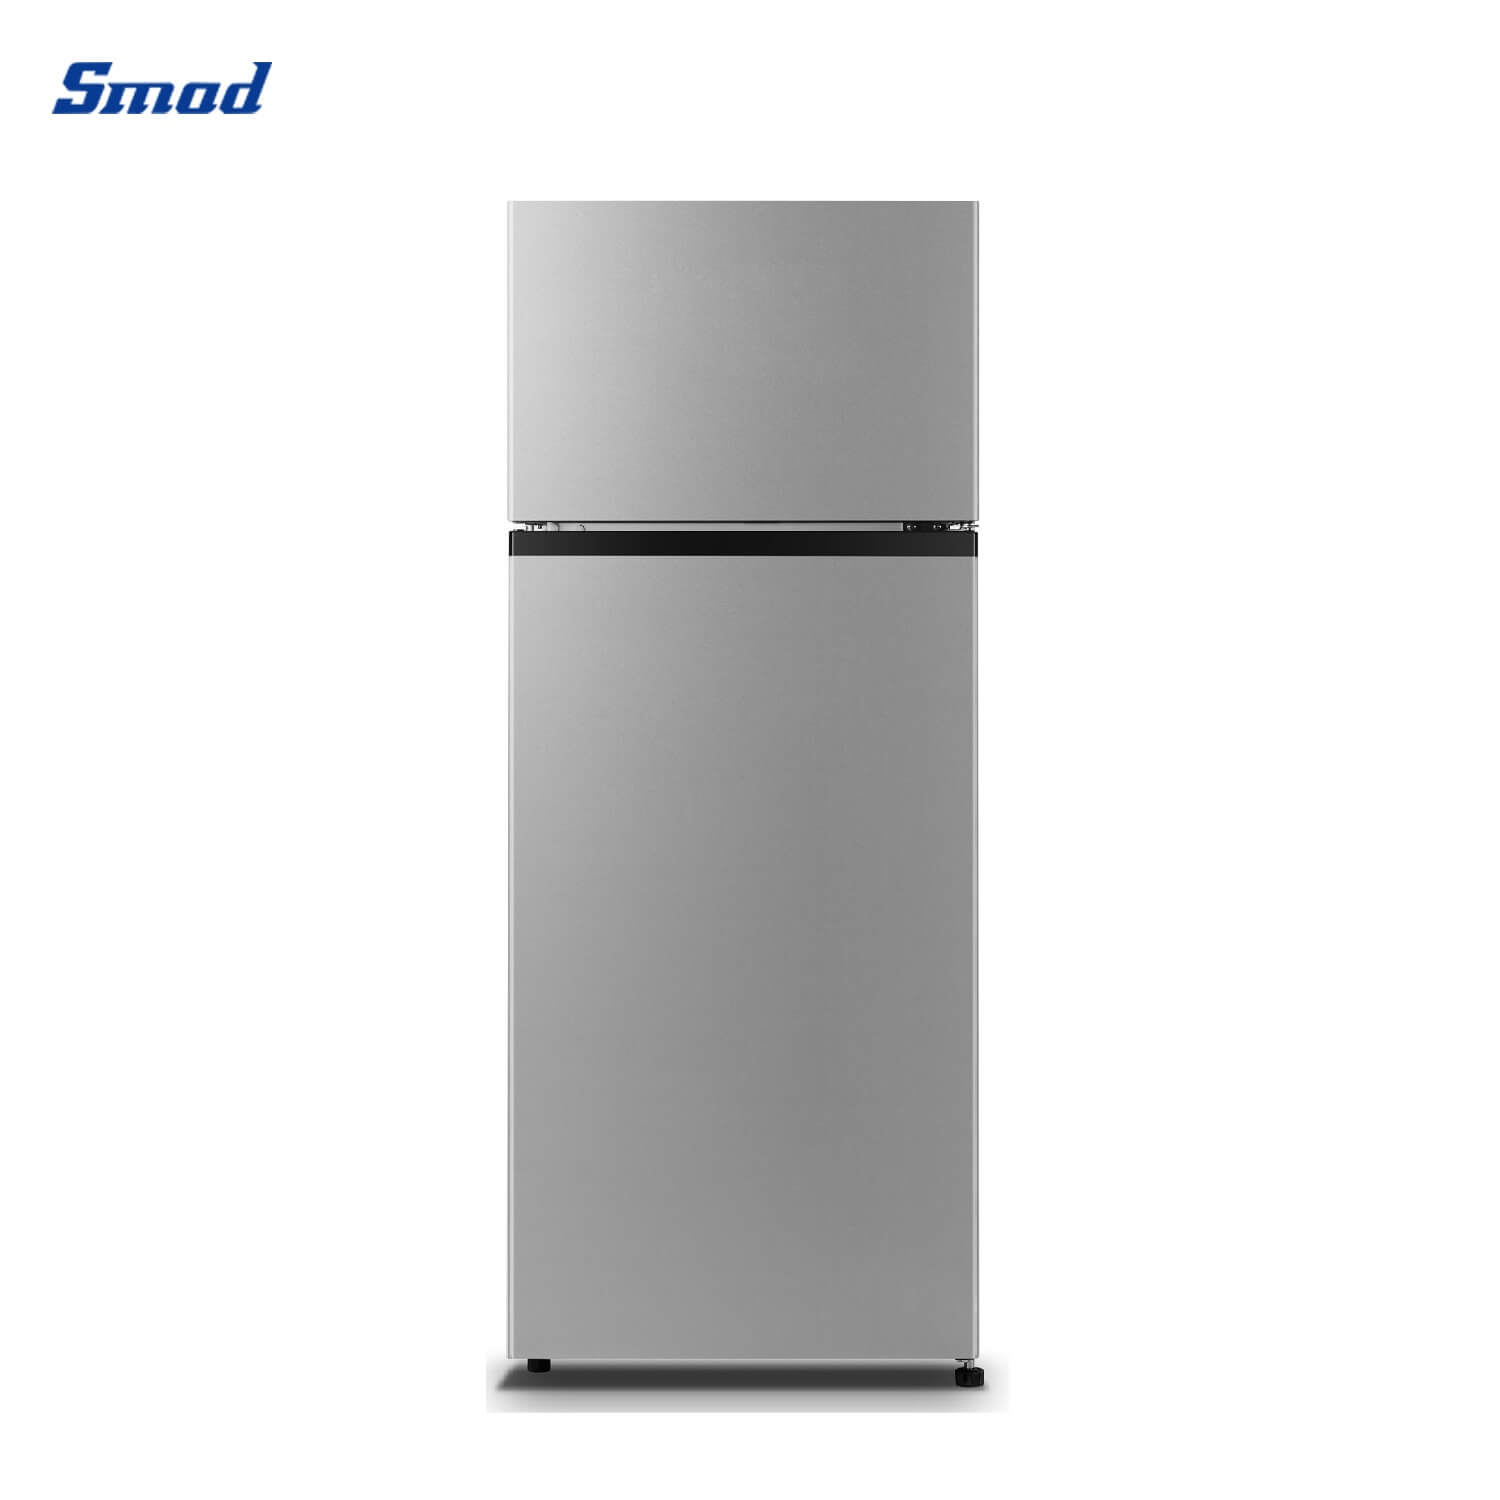 
Smad 205L White Double Door Fridge Freezer with Mechanical Thermostat